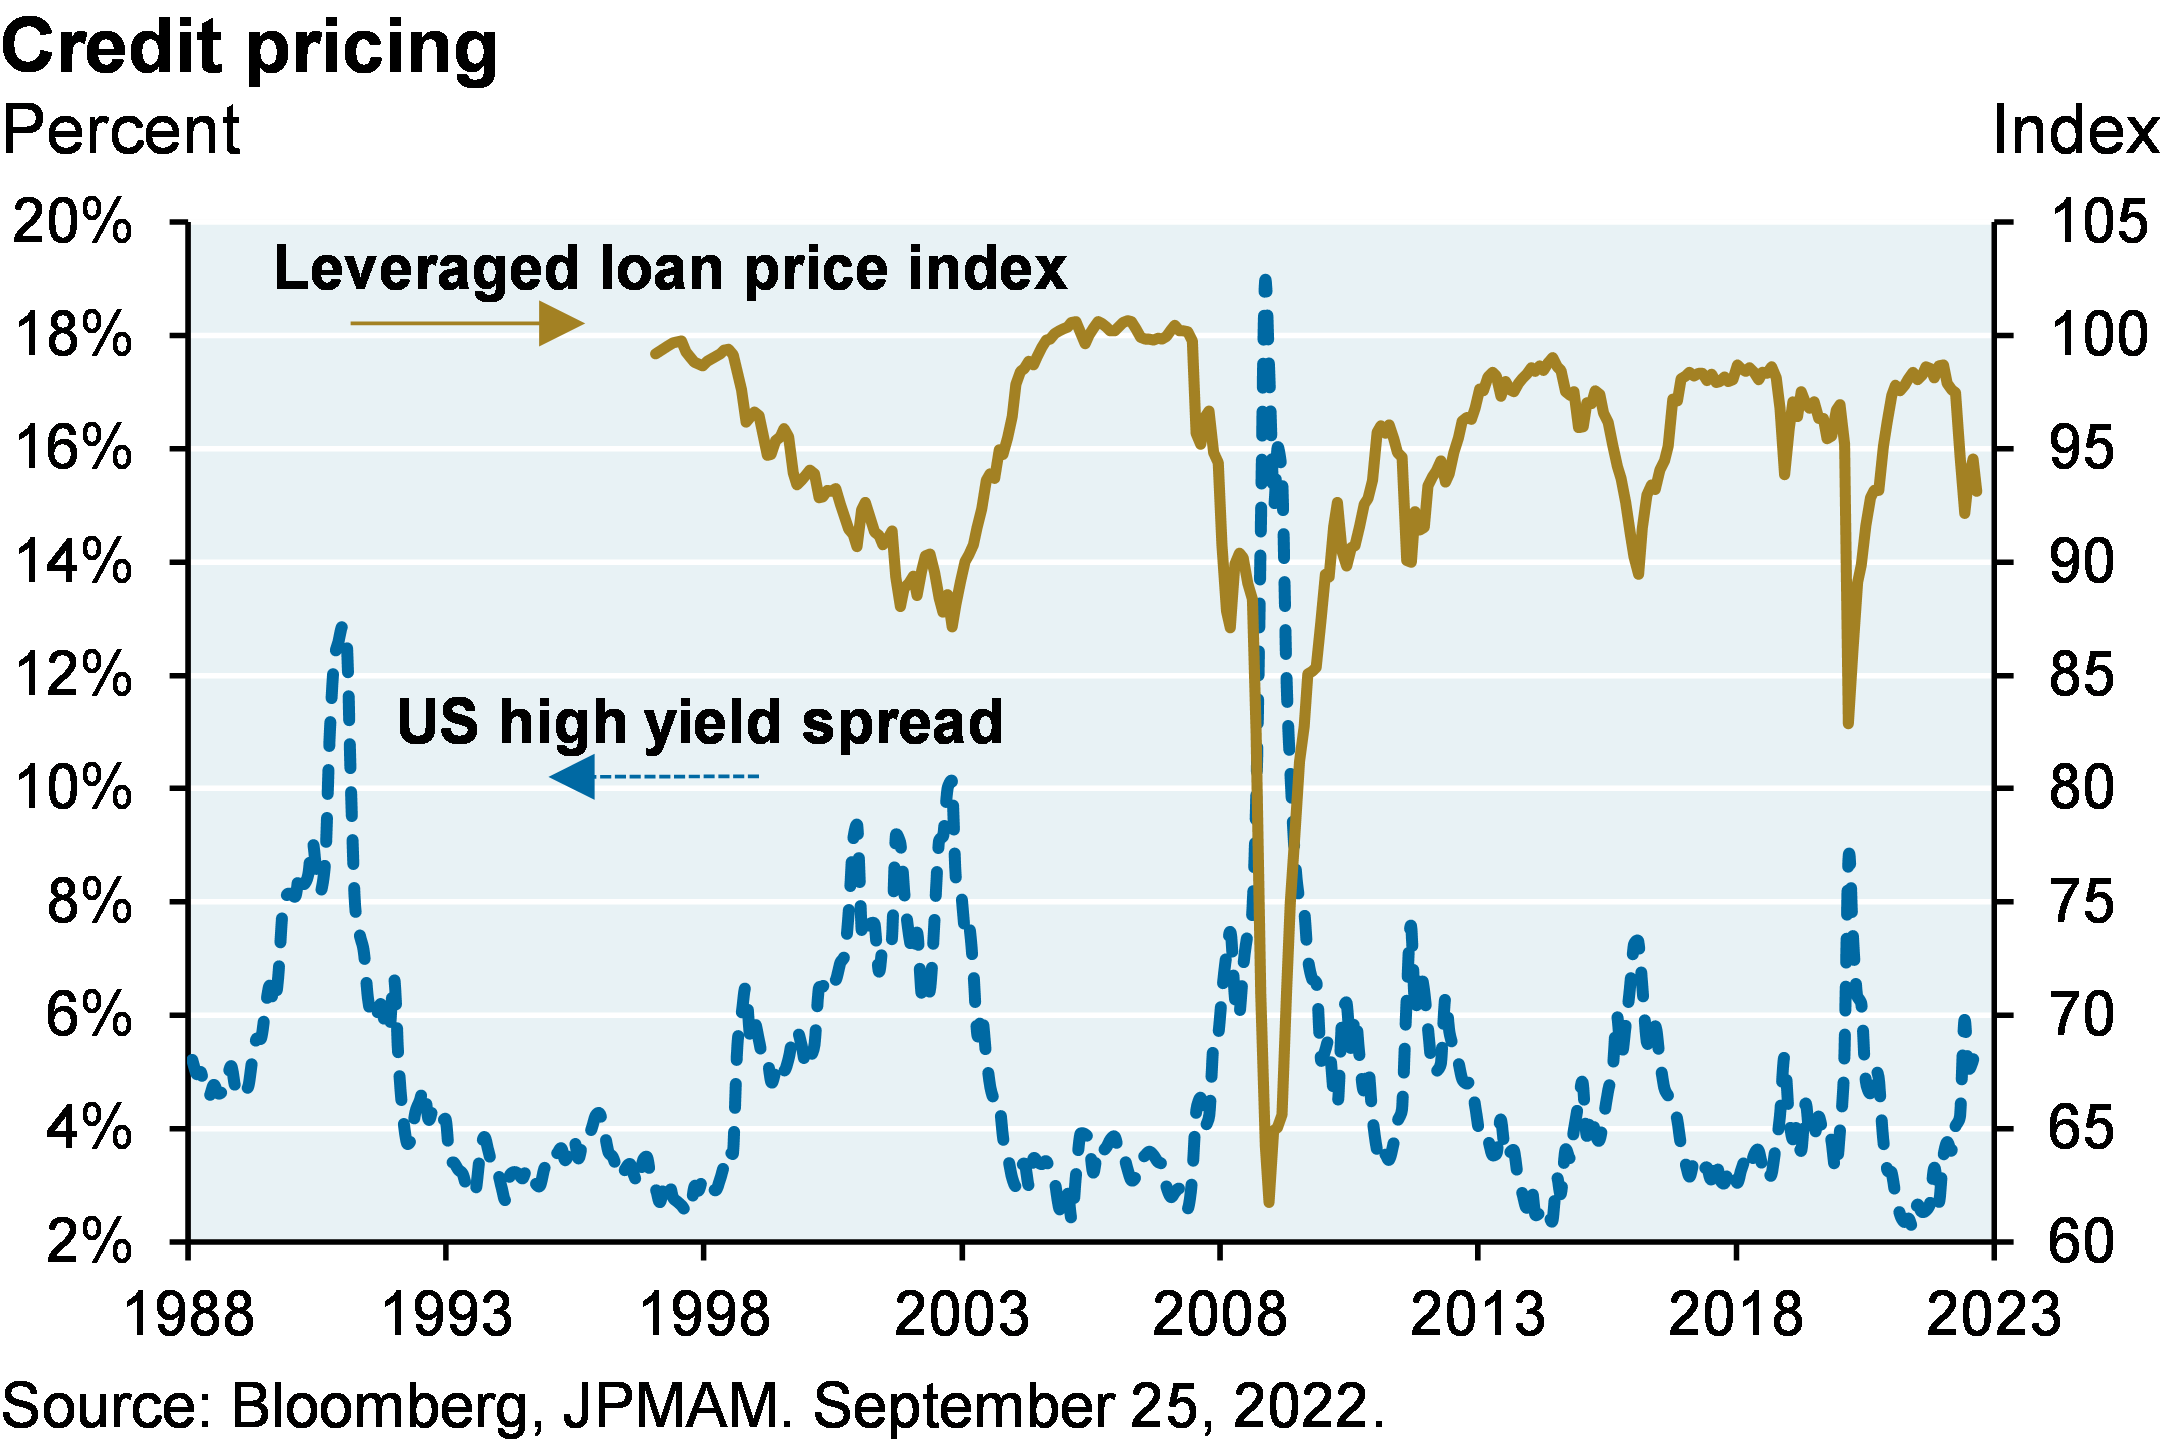 Line chart plots the S&P 500 leveraged loan price index (since 1997) and US high yield credit spreads (since 1988). Line chart shows the index has fallen, while spreads have widened since late 2021. However, both have not reached levels seen in previous recessions (i.e., 2020, 2008, etc.)